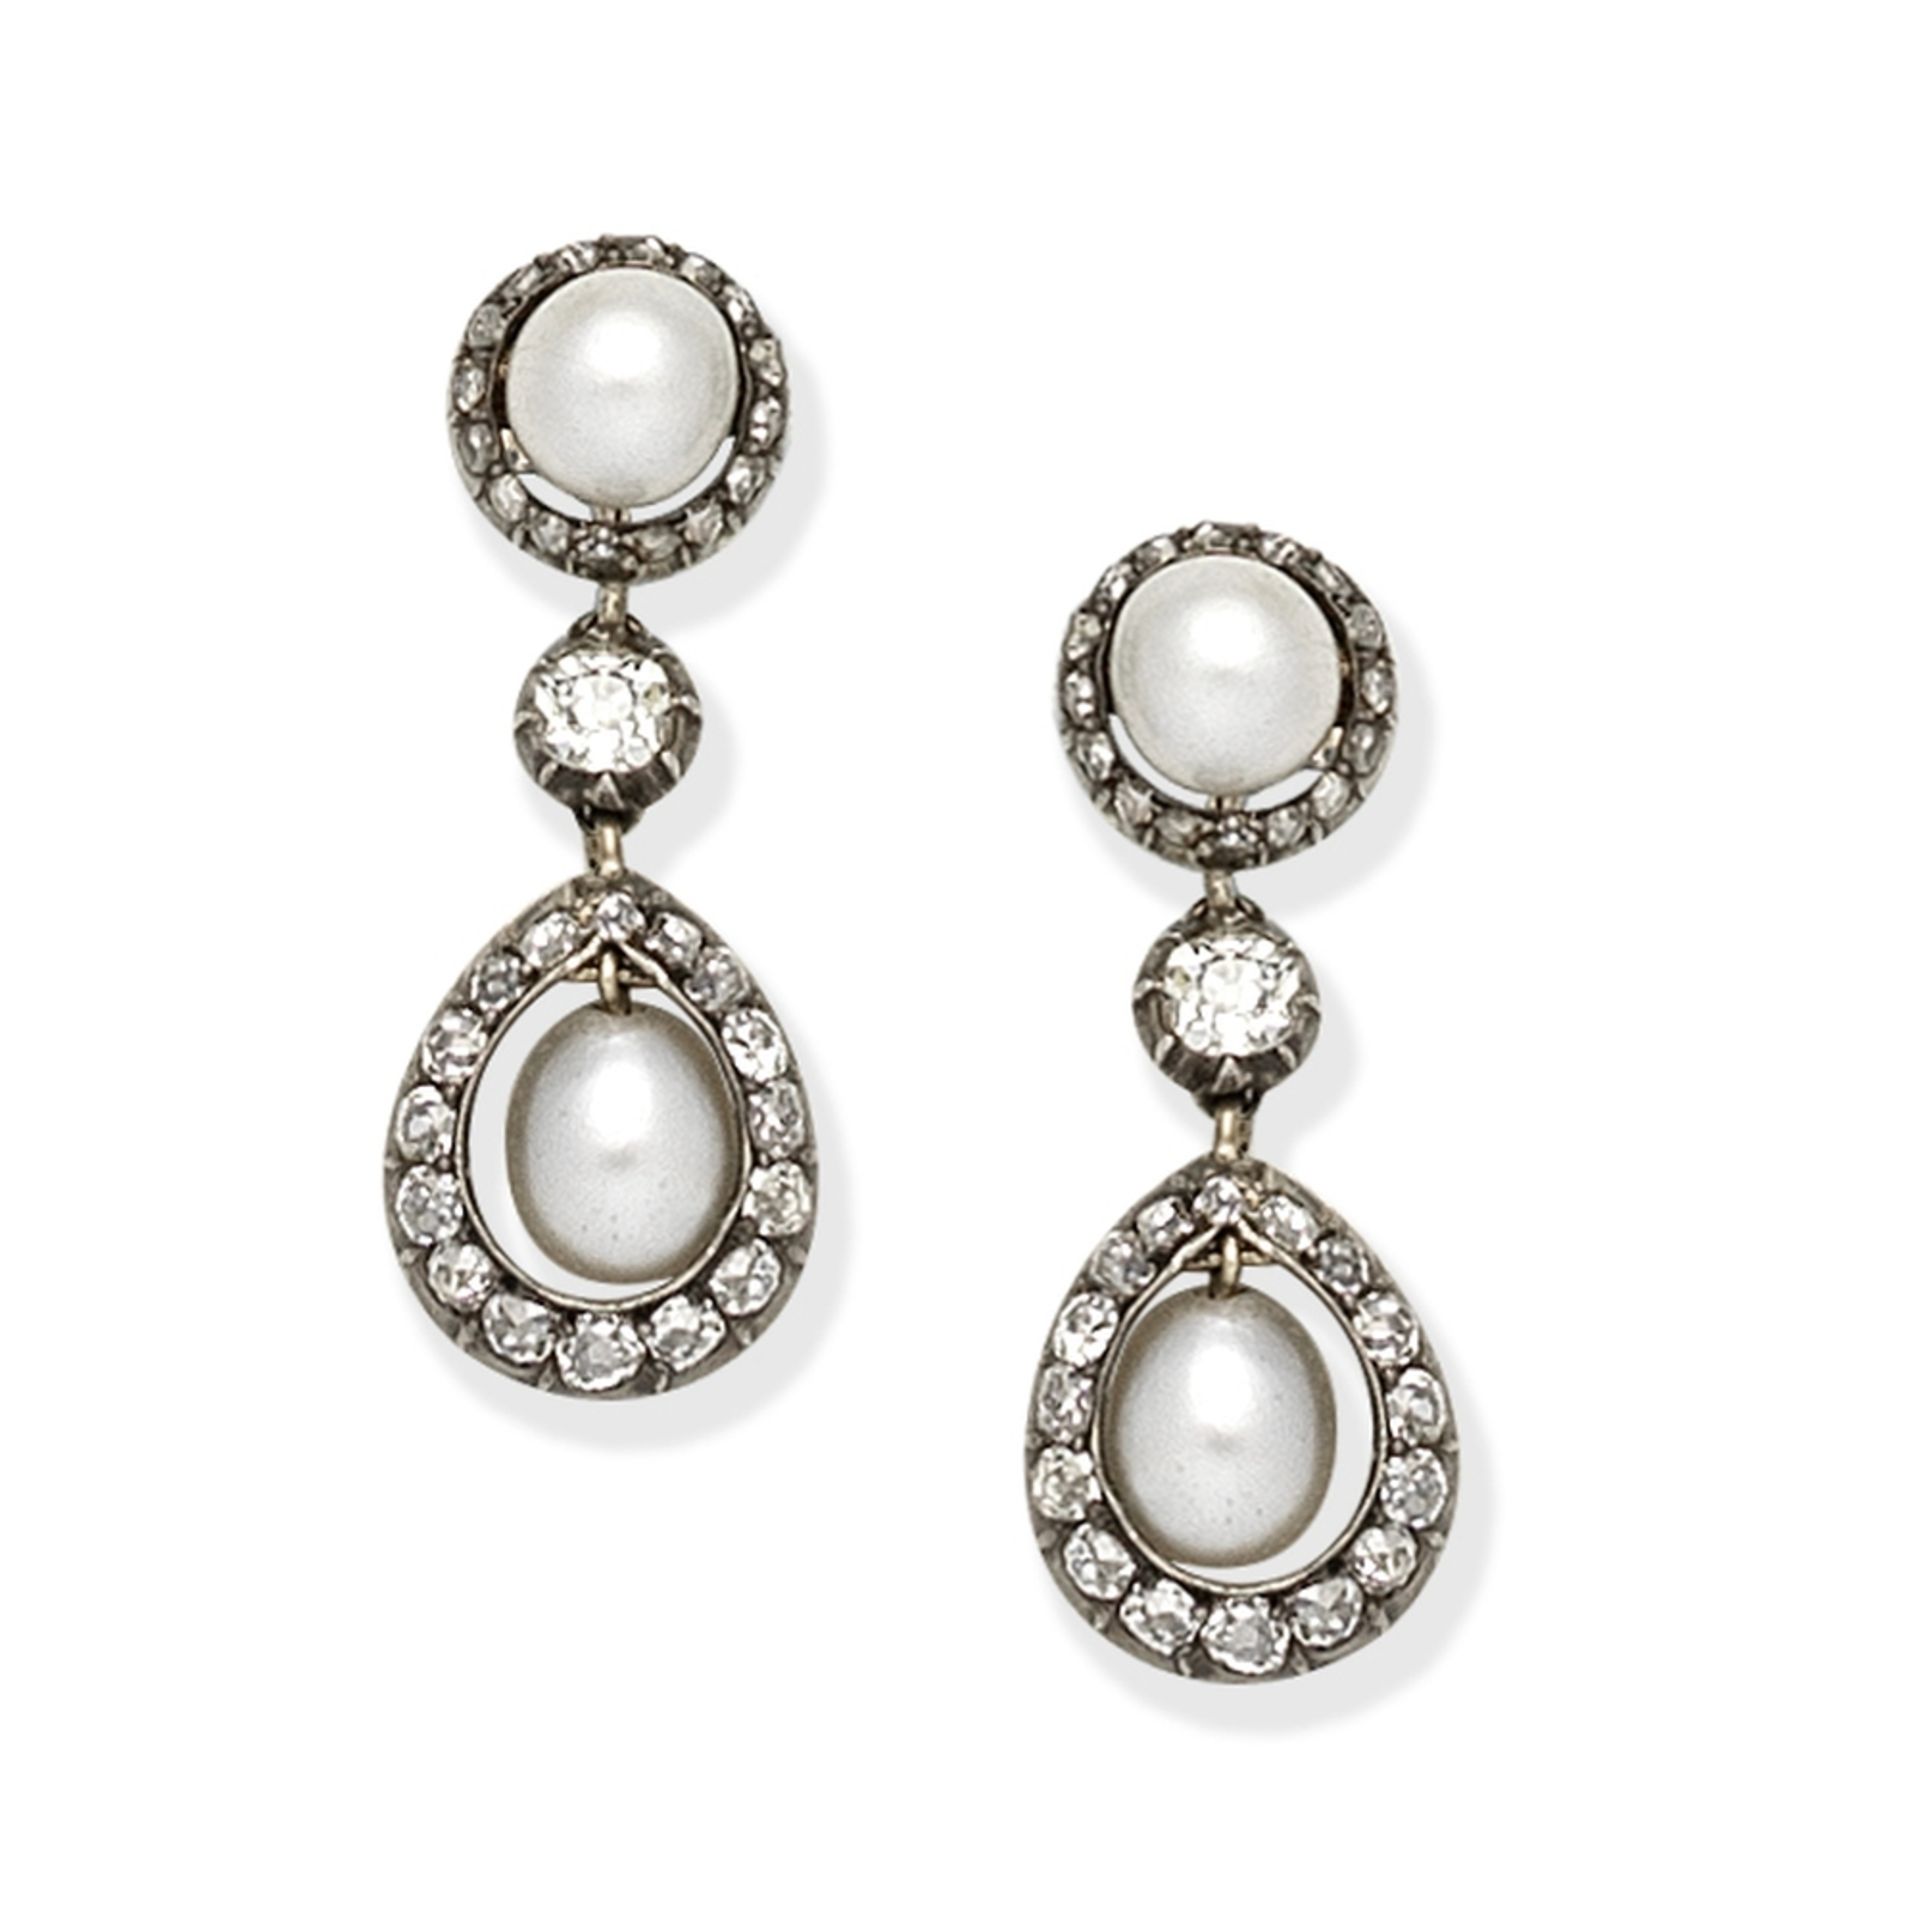 PEARL AND DIAMOND PENDENT EARRINGS,